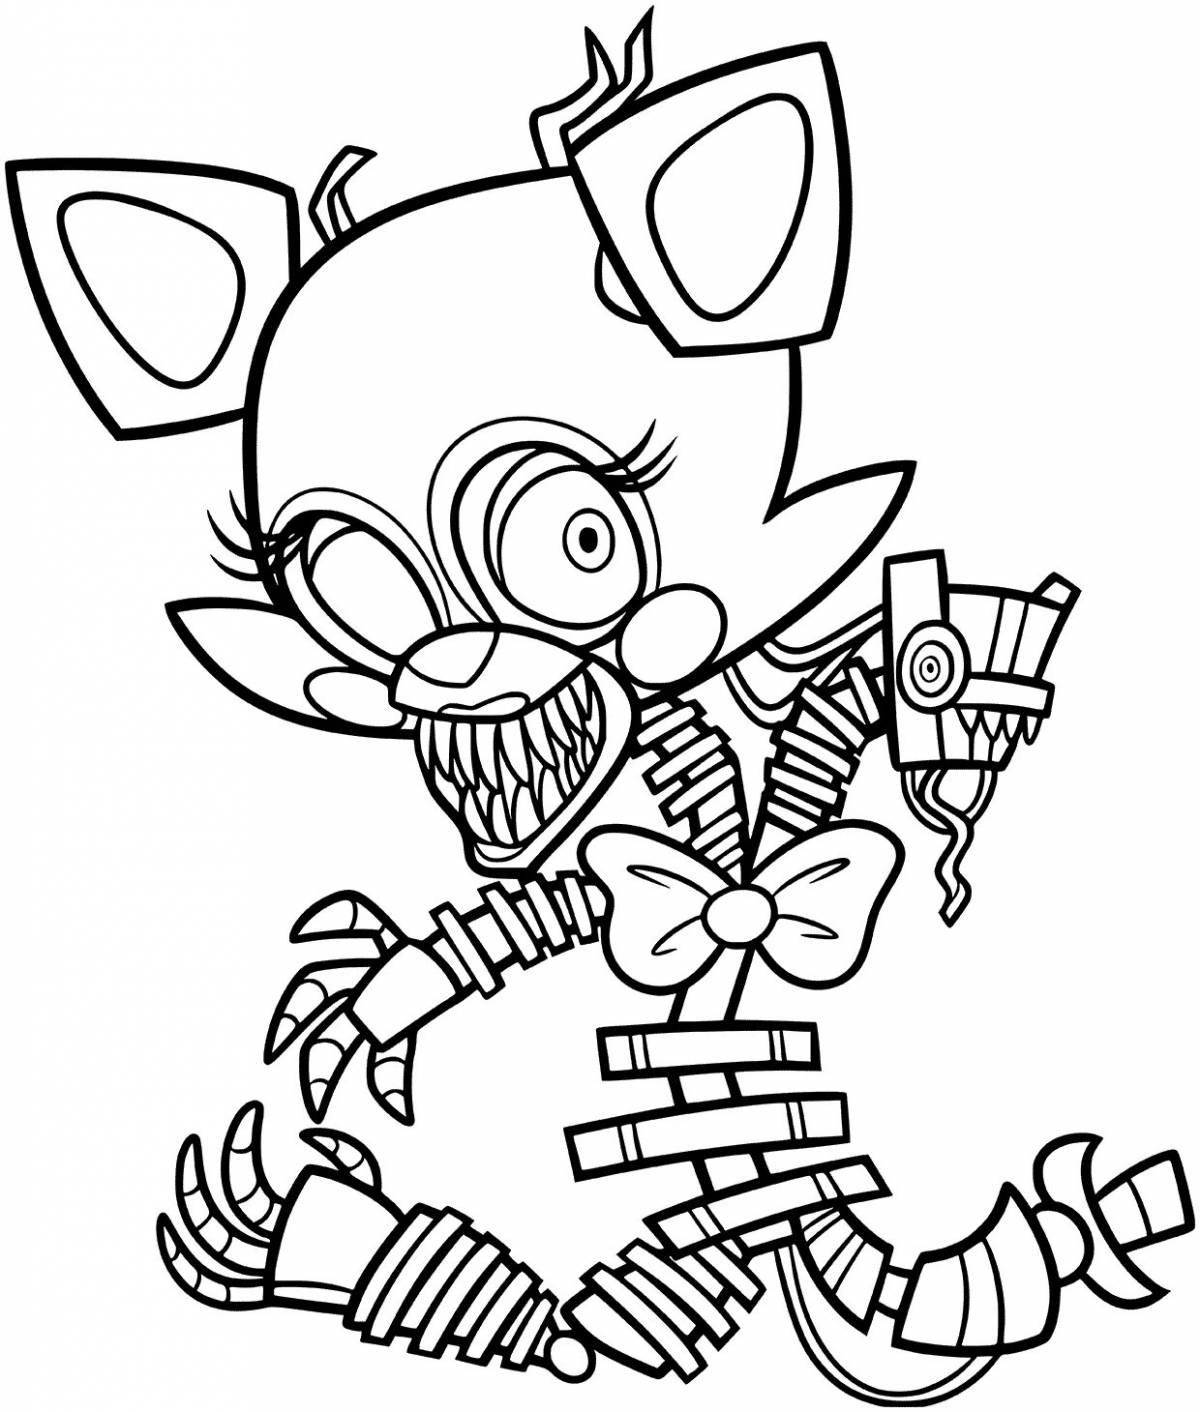 Dreamy Five Nights at Freddy's Coloring Book